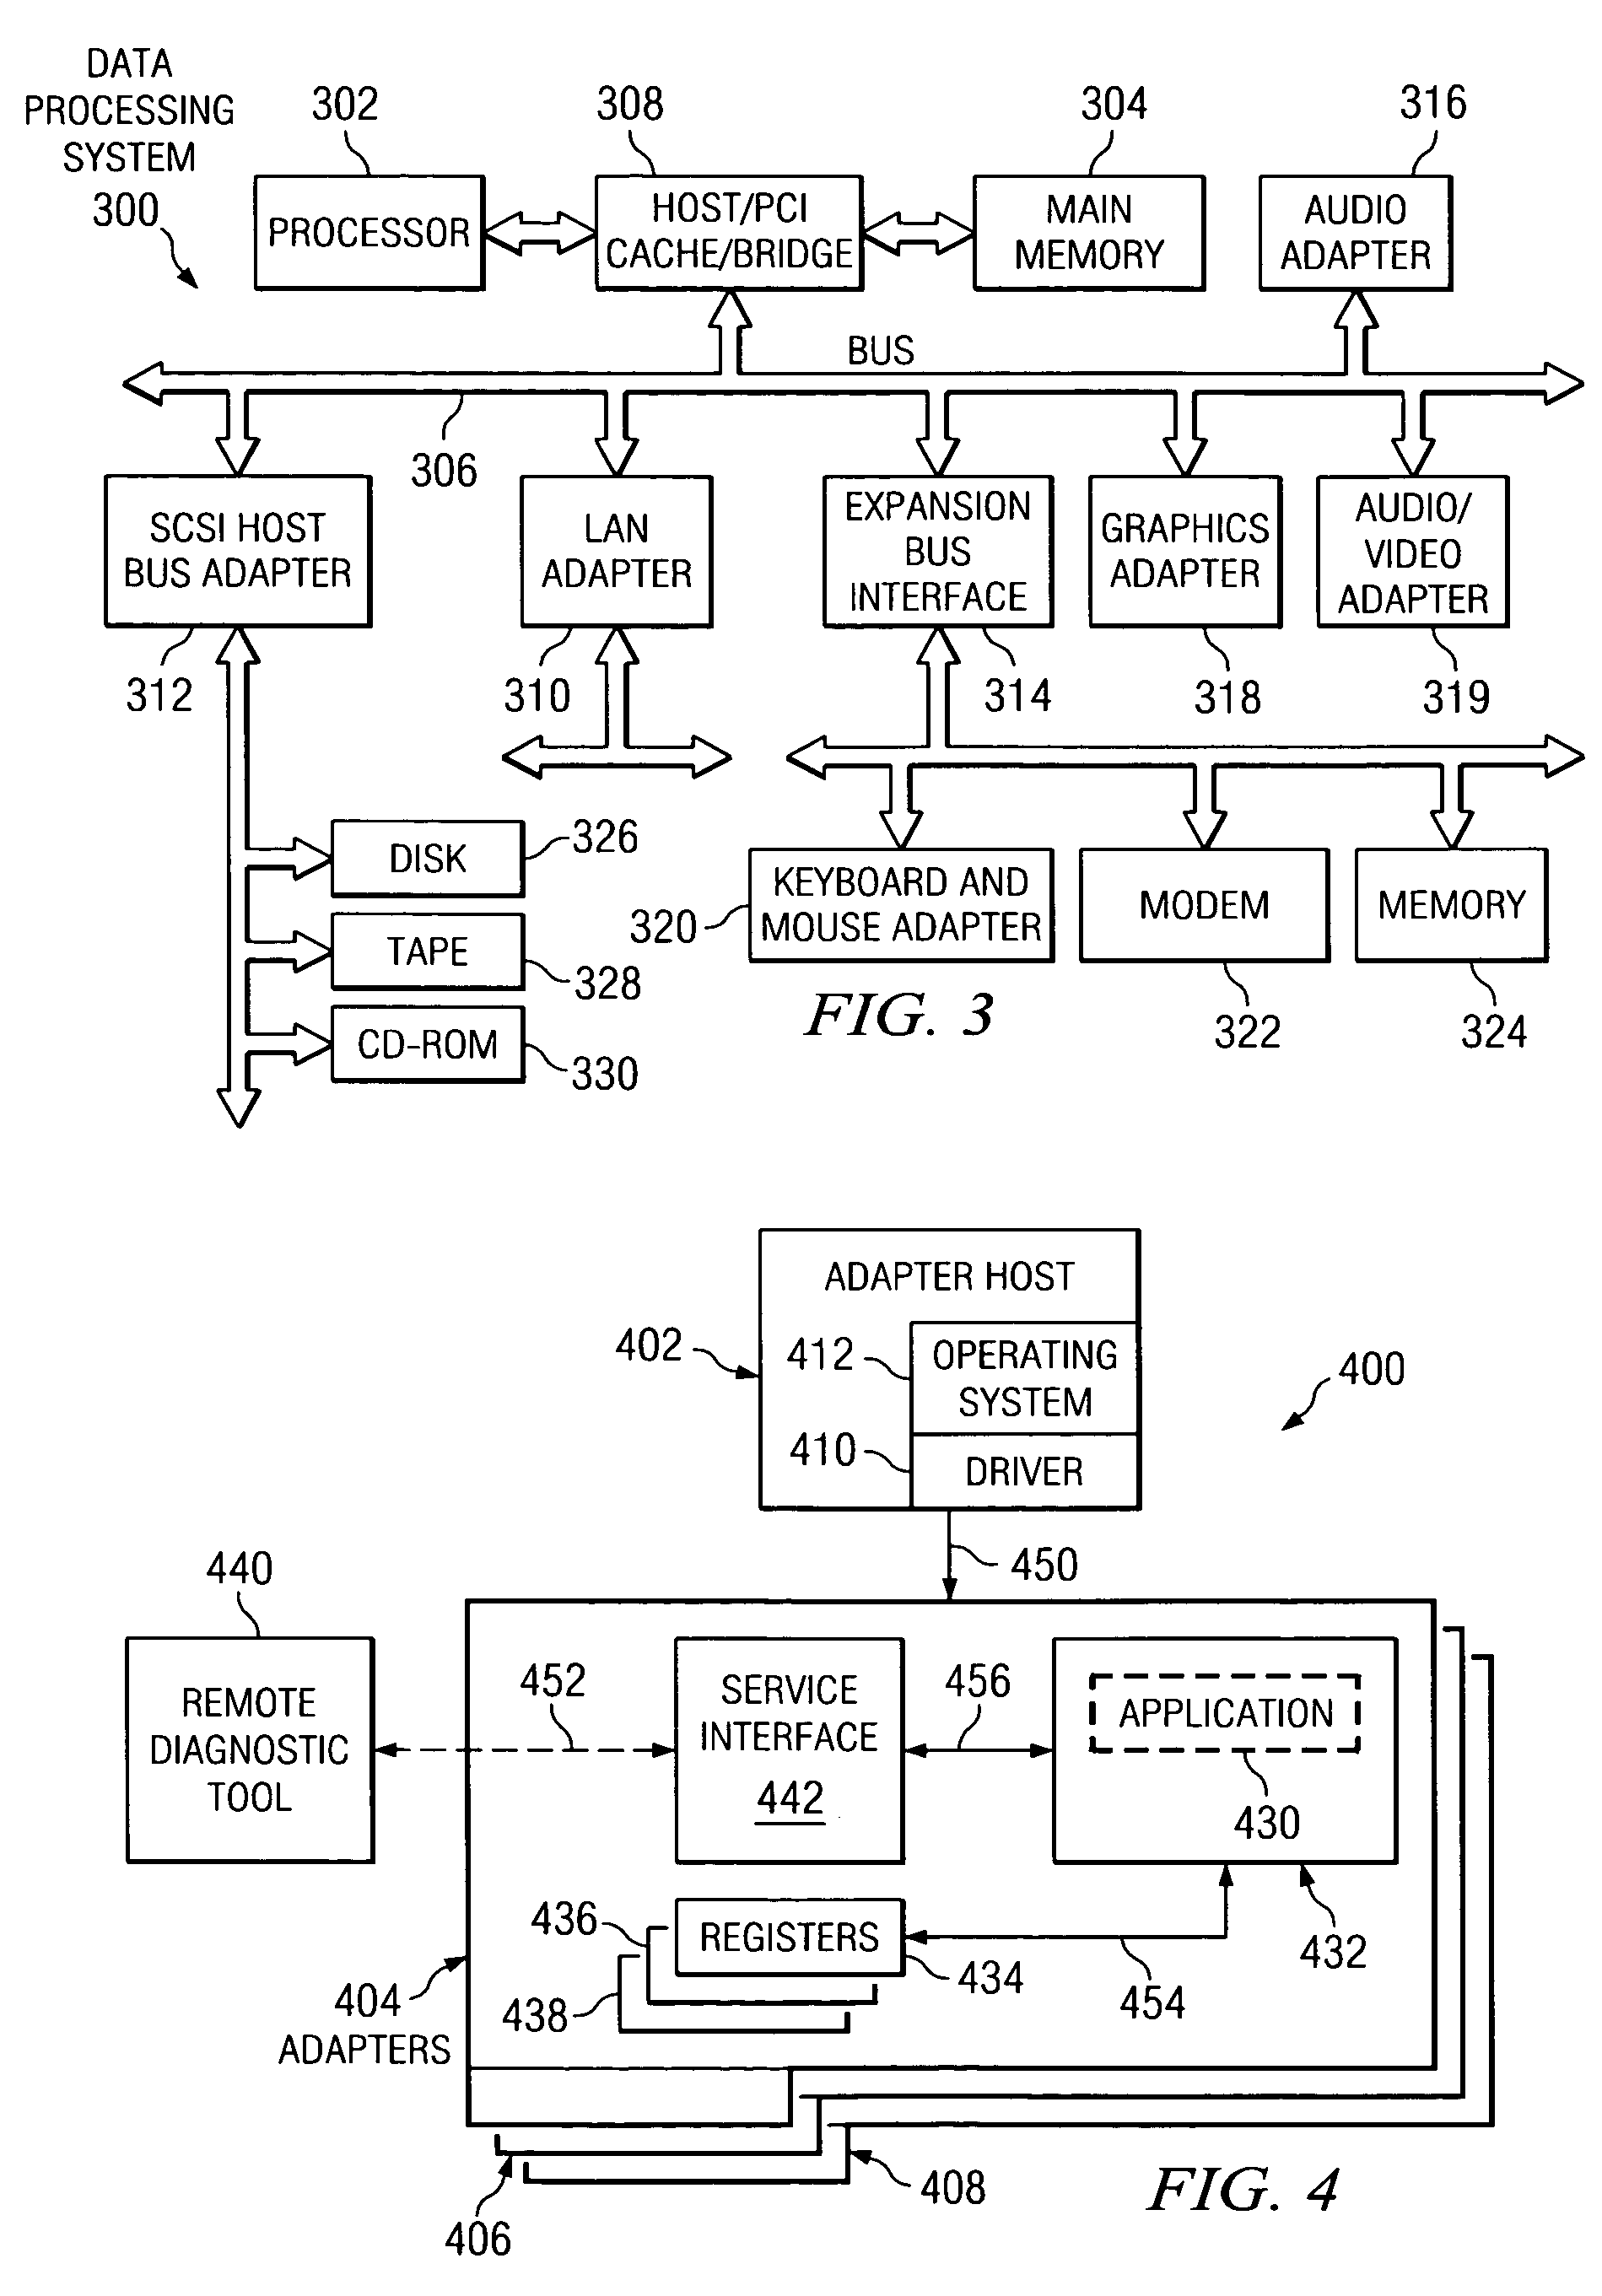 Application for diagnosing and reporting status of an adapter